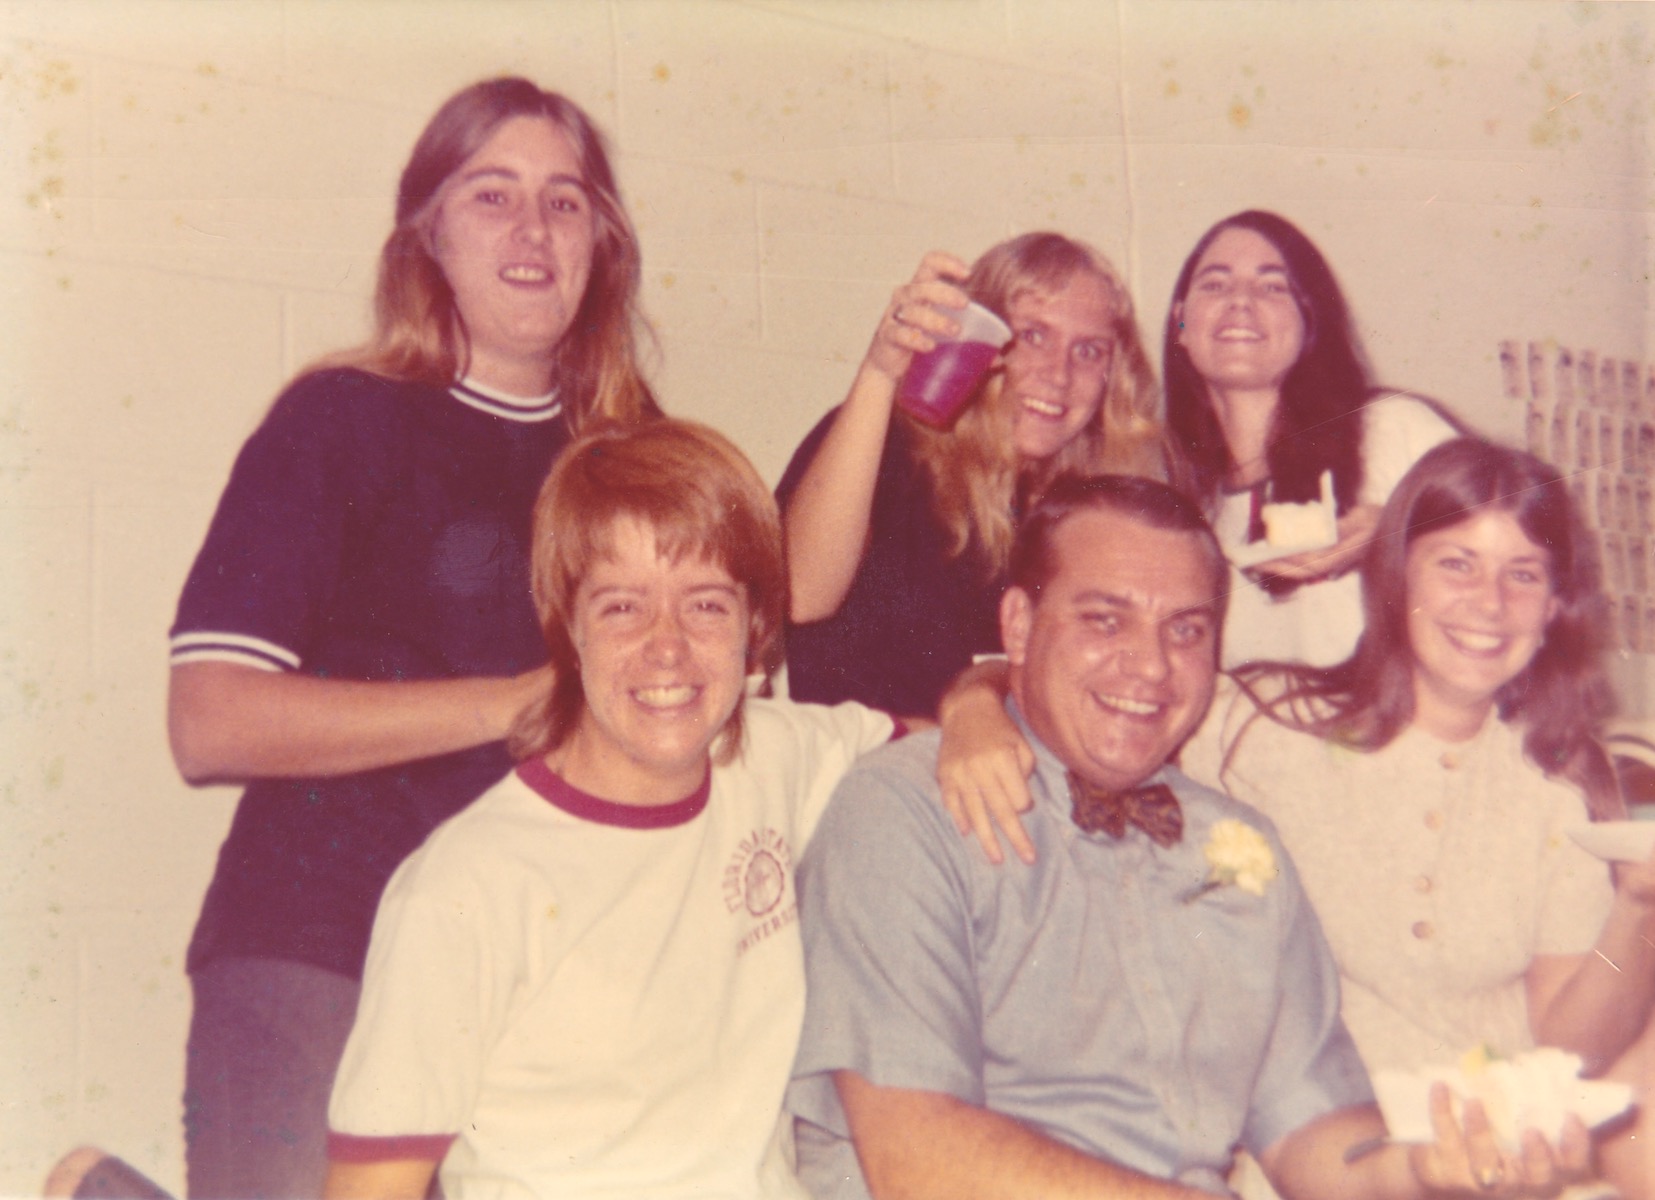 K.C. Potter in the front row at a Vanderbilt dorm party with unknown mischievous students, Nashville, TN, mid 1970s.